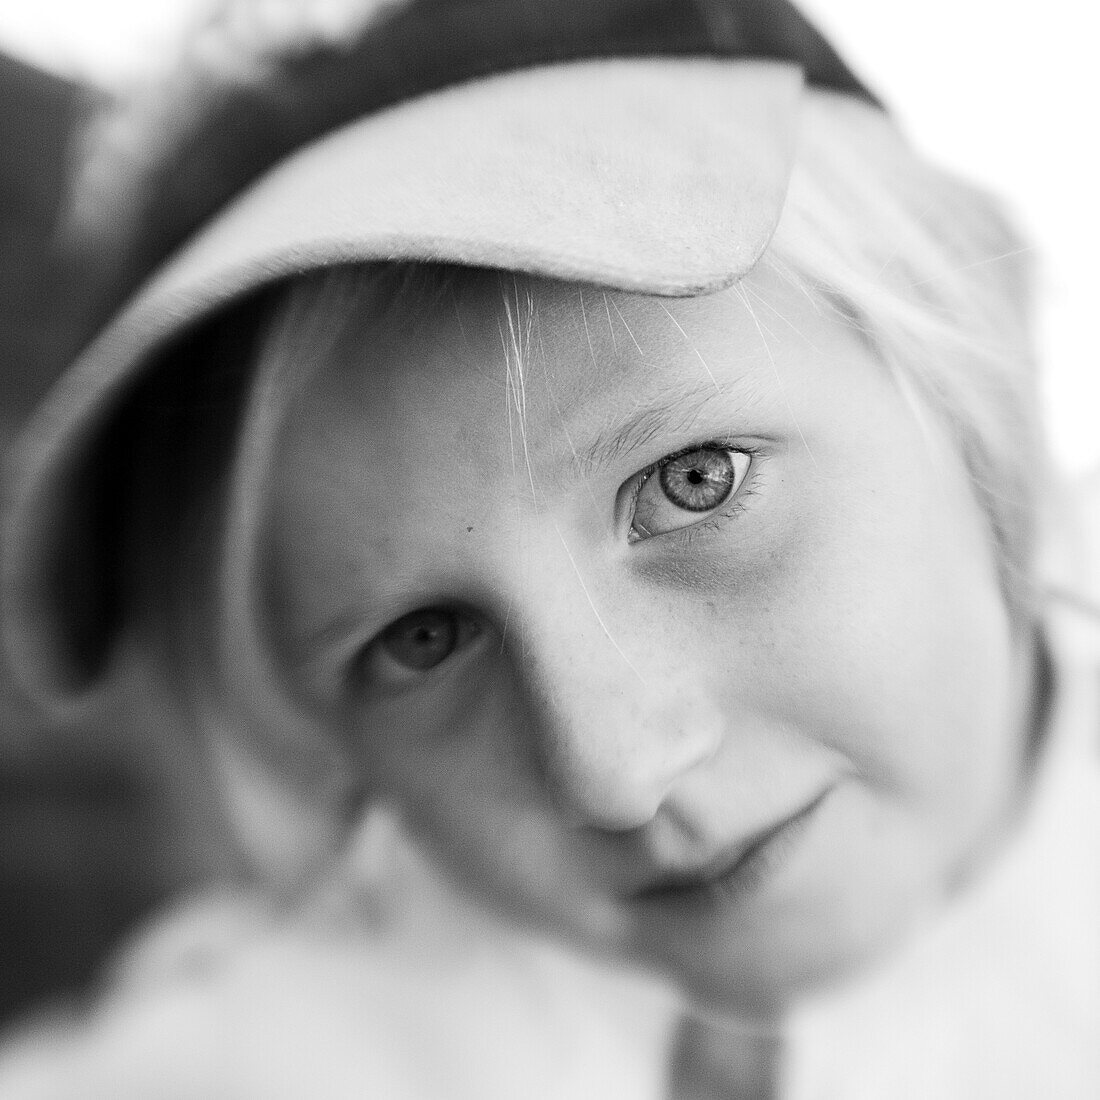 Blond boy with a cap looking into camera (black and white photo using Lensbaby technique), Borden, Western Australia, Australia